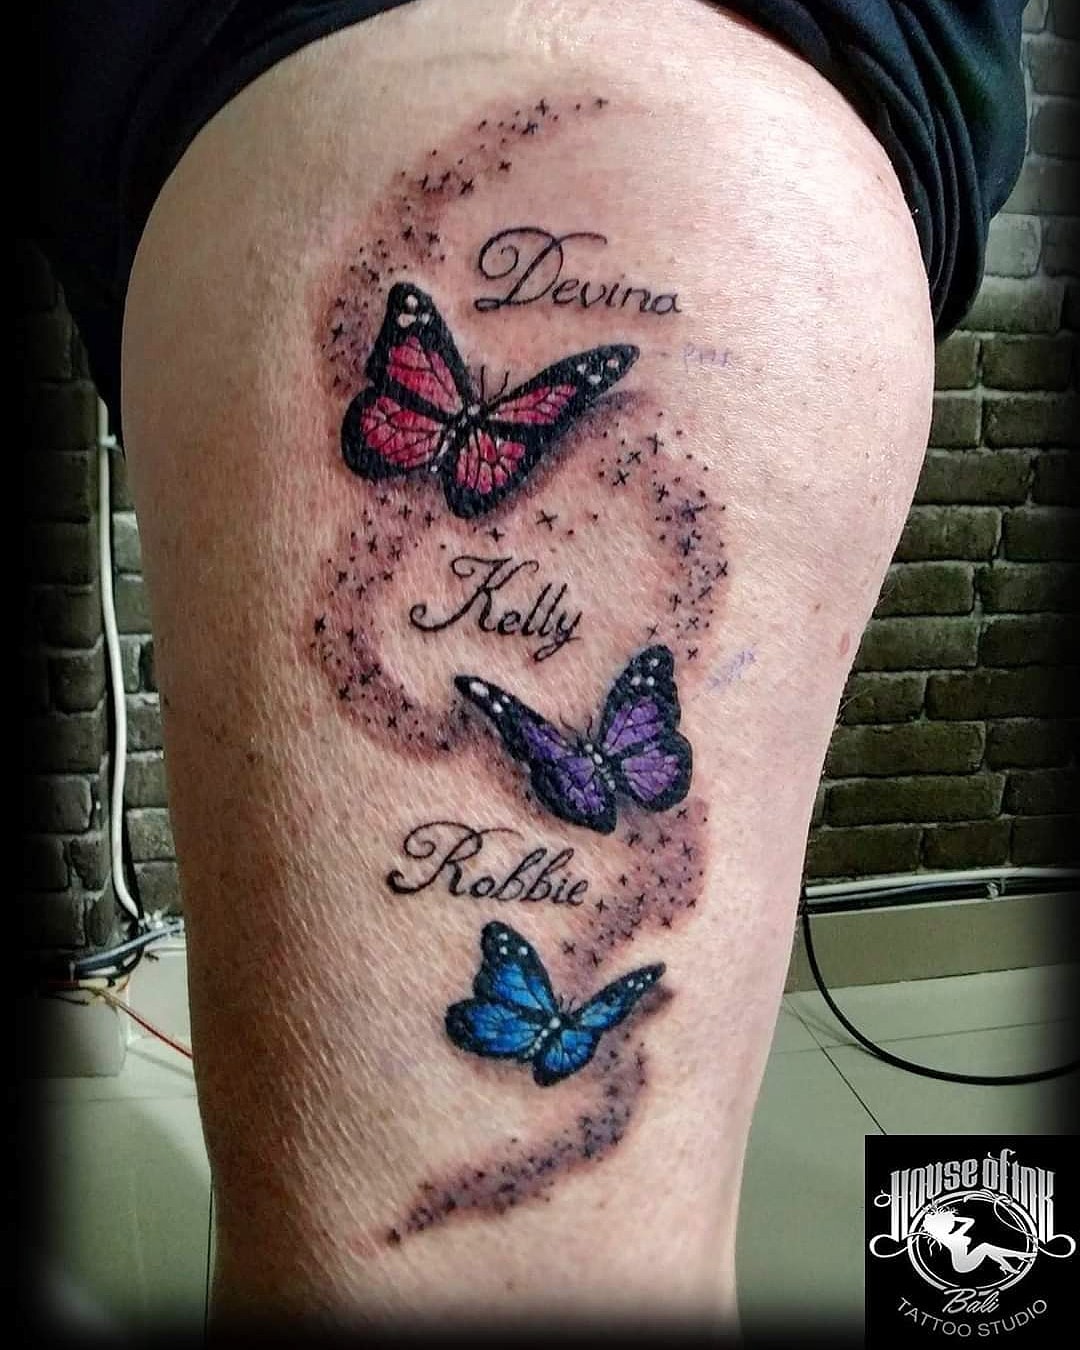 Butterfly and stars tattoo